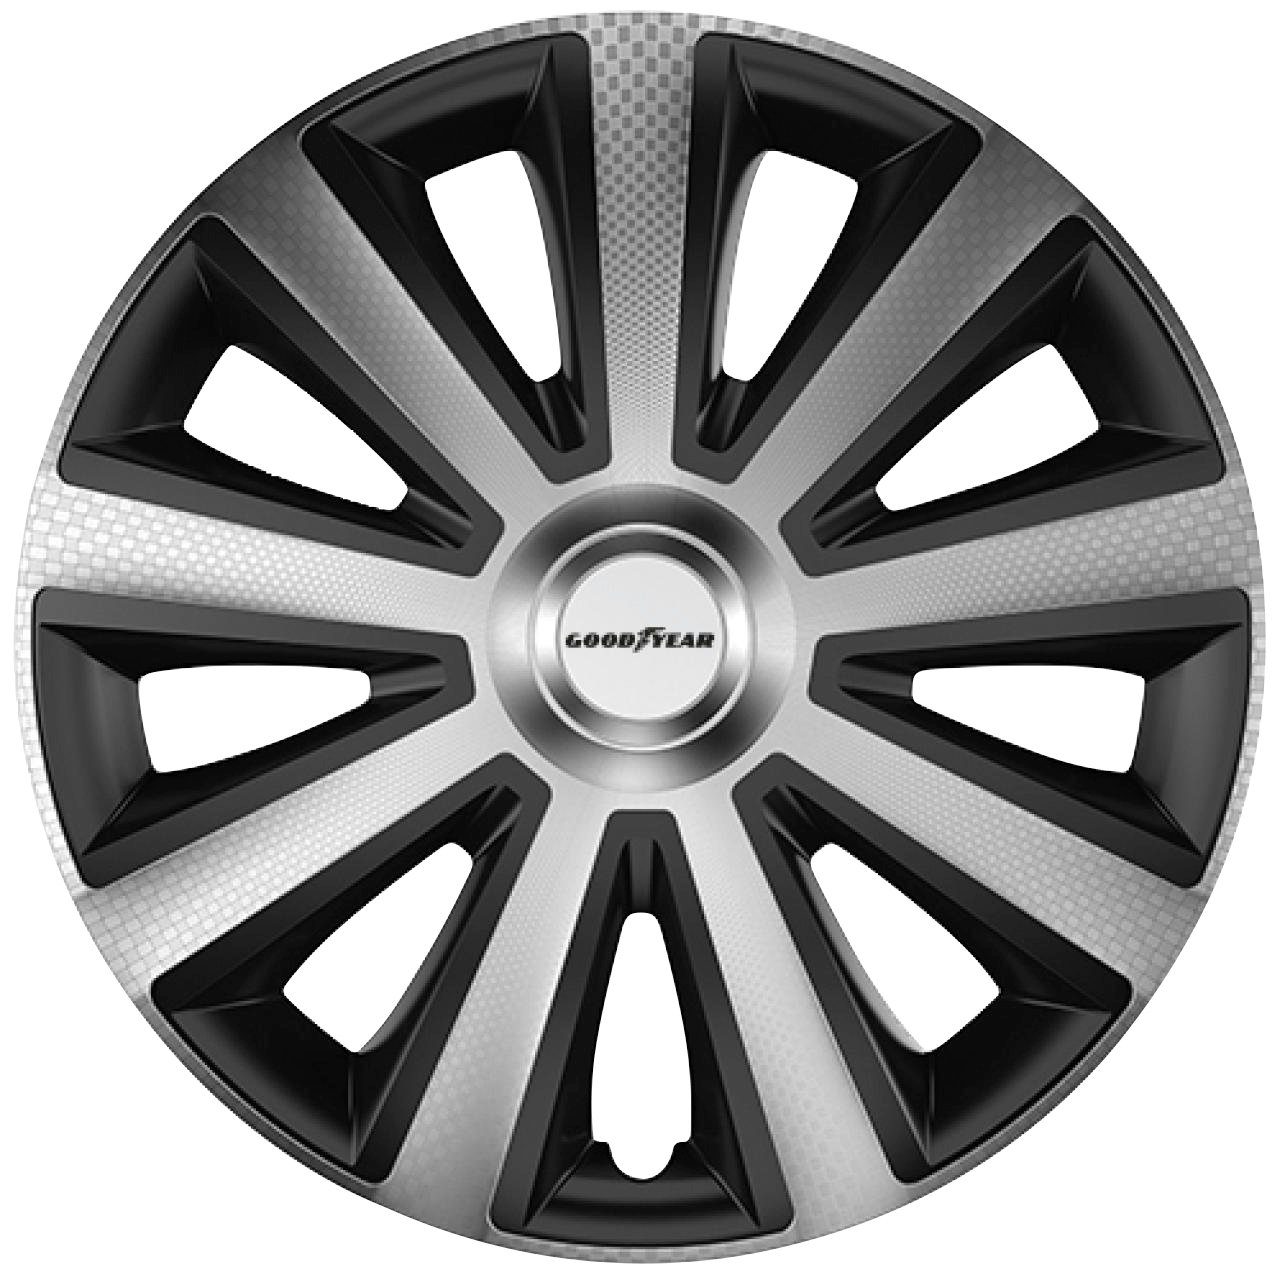 Goodyear Radkappe Memphis Carbon 14, 14 in Zoll, (Set, 4-St)